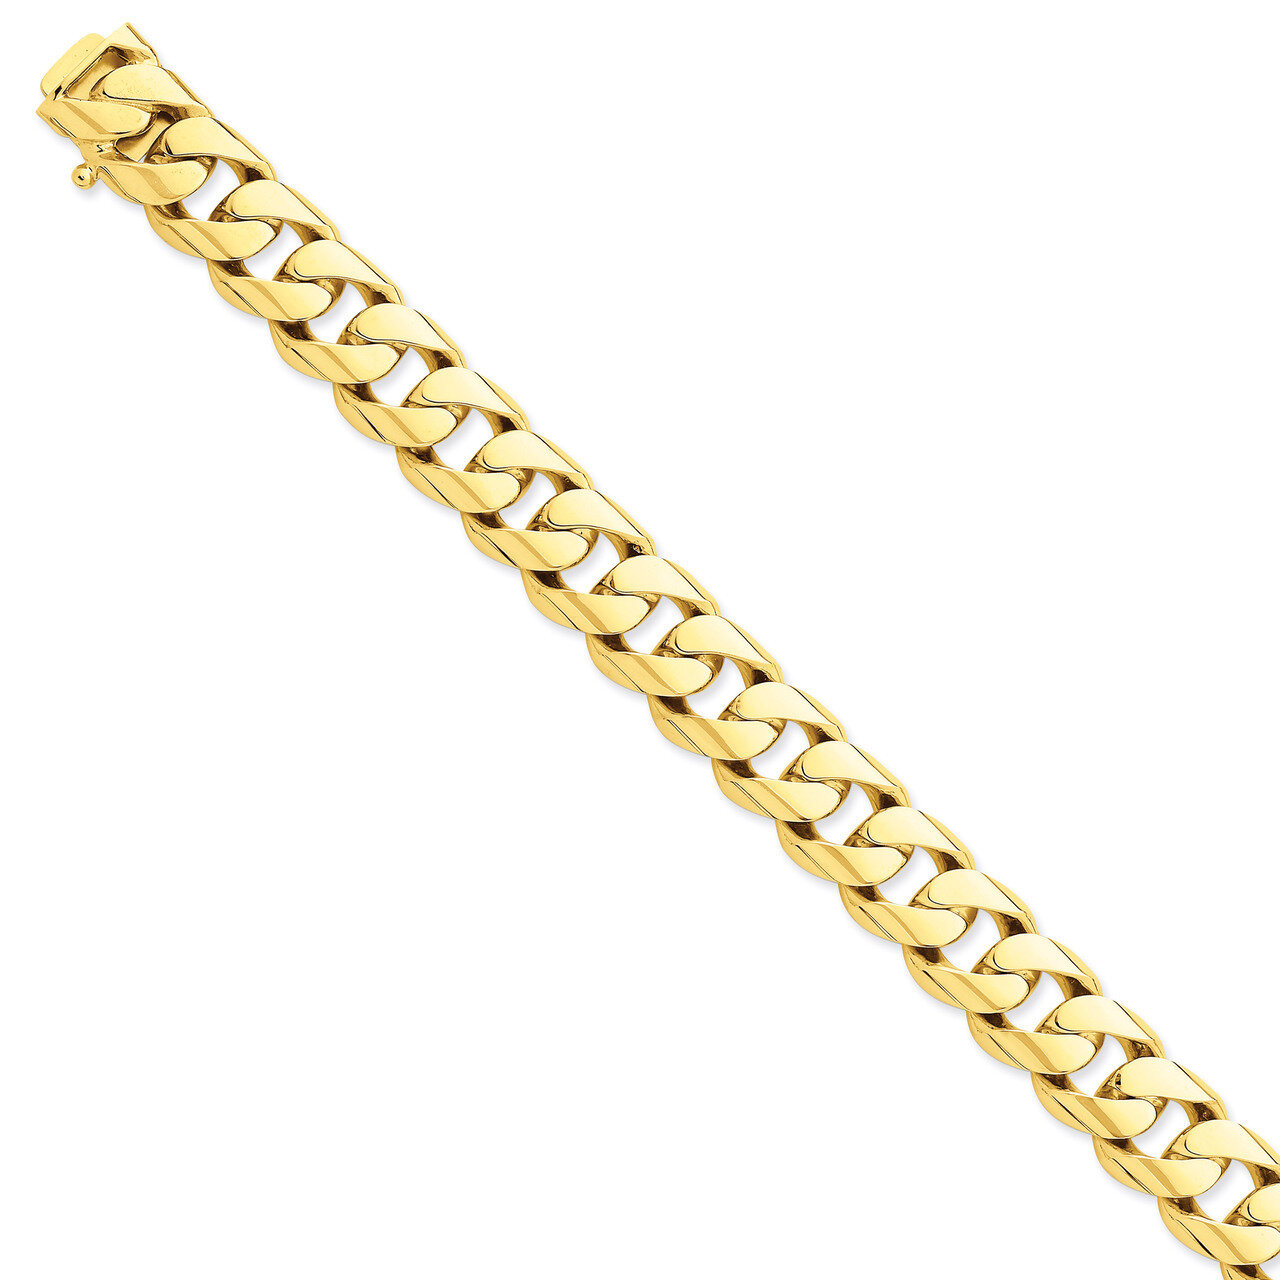 13mm Hand-polished Rounded Curb Chain 9 Inch 14k Gold LK128-9